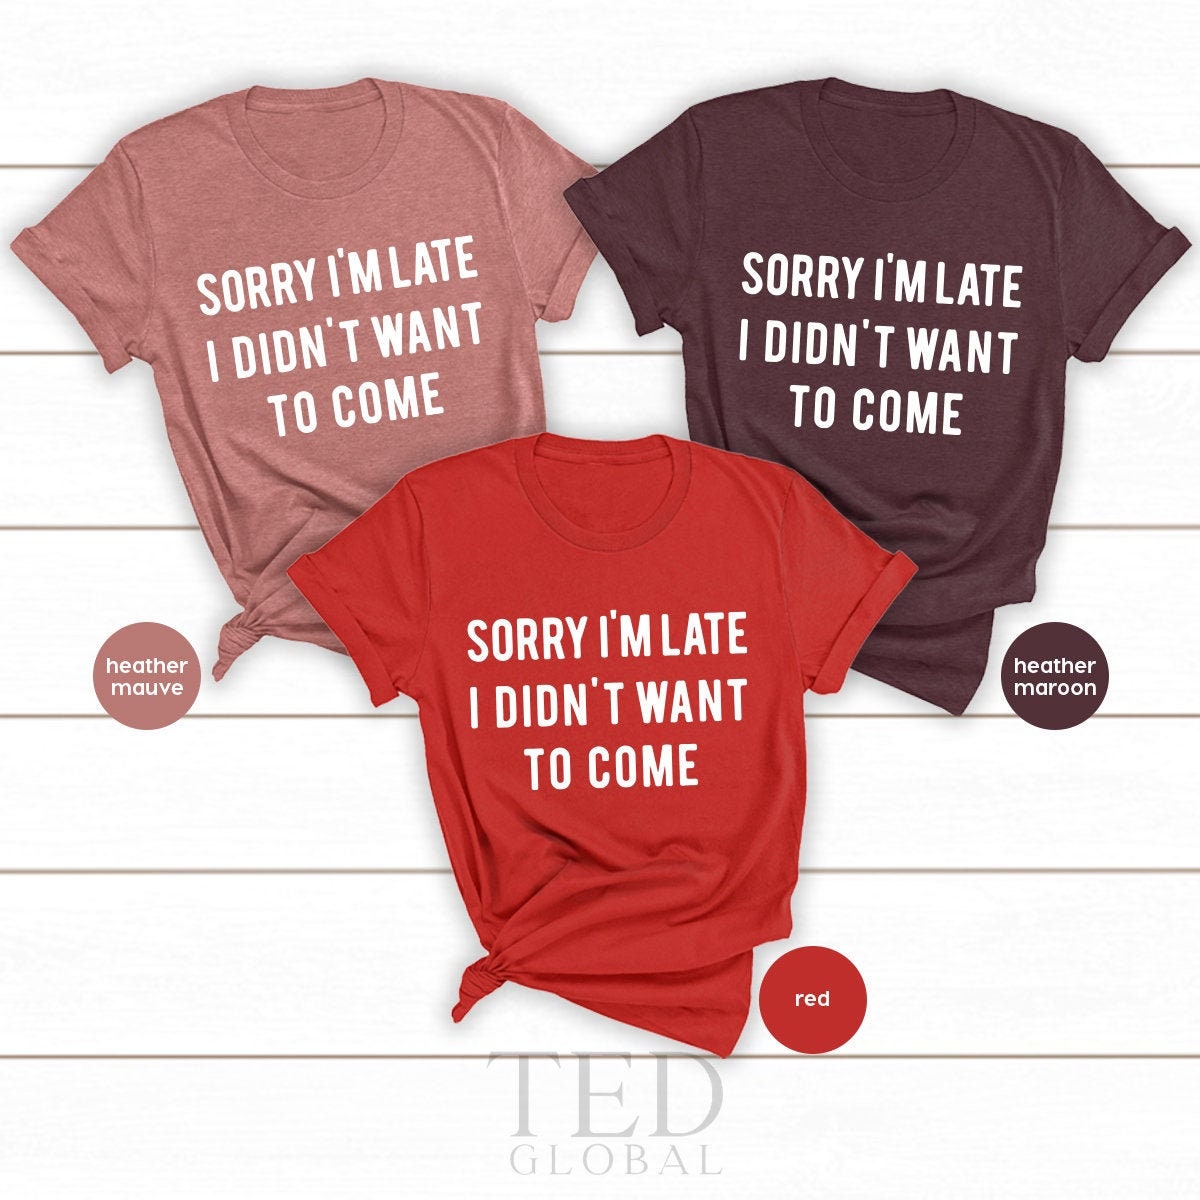 Funny Shirt, Gift for Sister, Introvert Shirt, Sarcastic Shirt, Birthday Shirt, Sorry I'm Late I Didn't Want to Come Shirt, Sorry Not Sorry - Fastdeliverytees.com